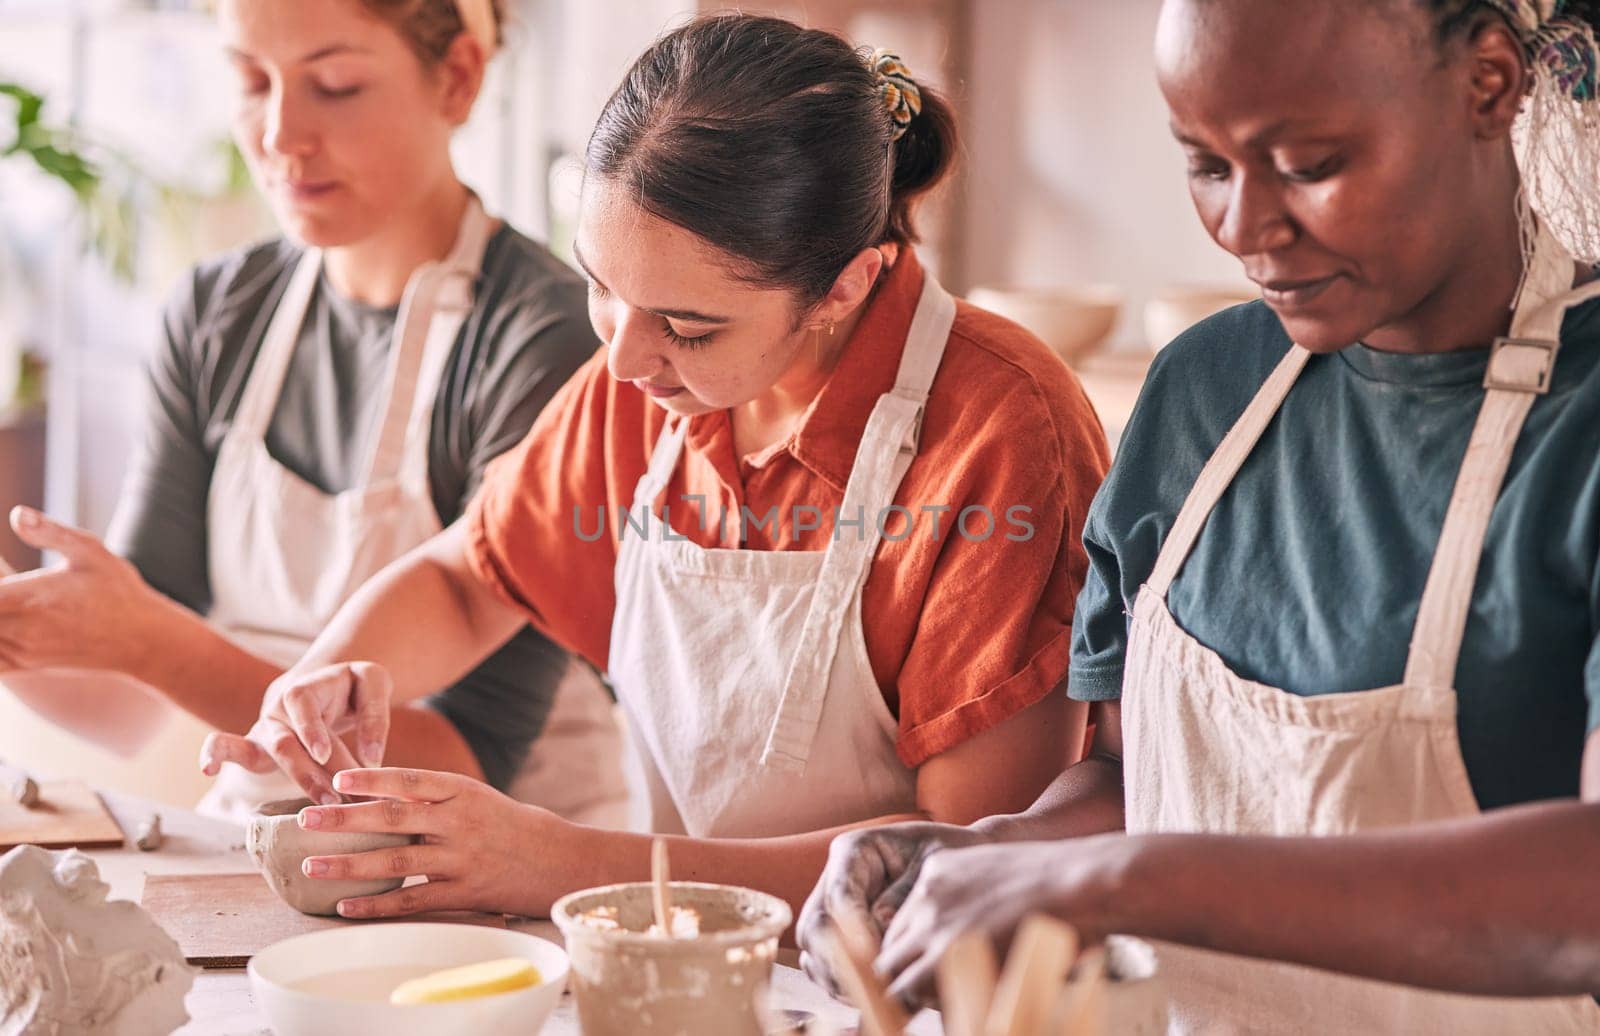 Pottery class, creative workshop or people design sculpture mold, manufacturing or art product. Diversity women, ceramic retail store or startup small business owner, artist or studio group molding.